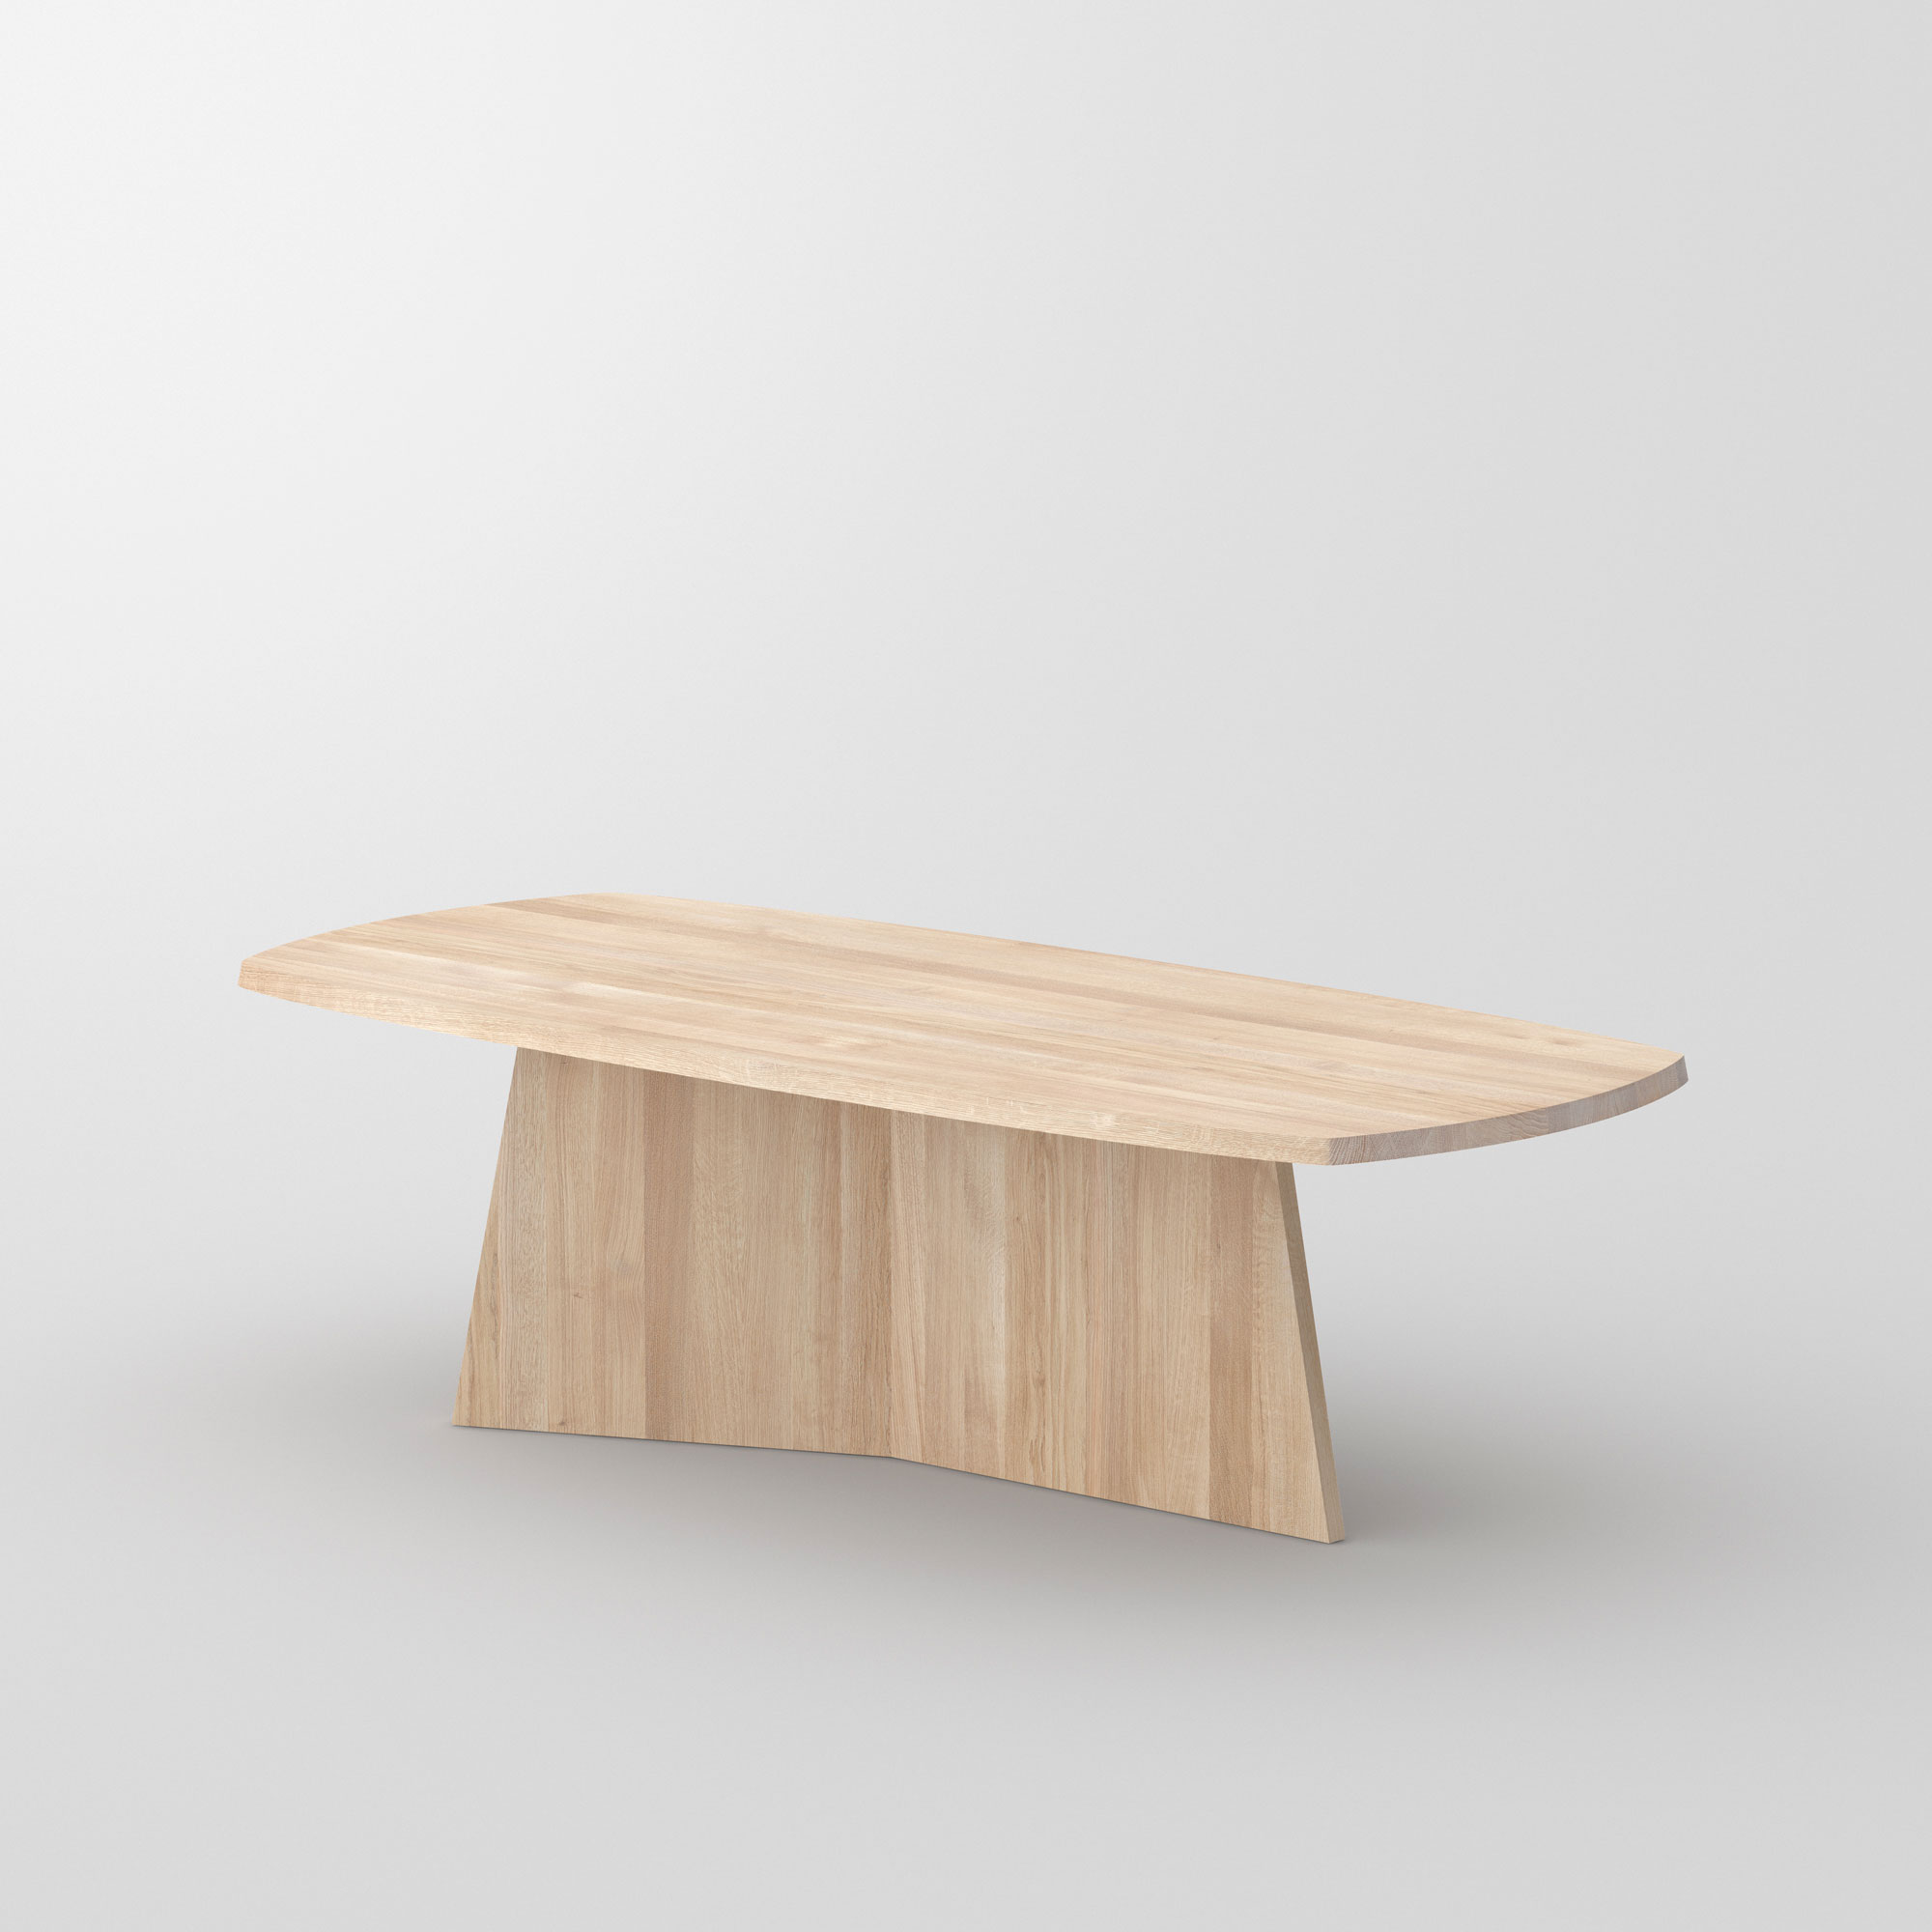 Design Dining Table LOTUS cam2 custom made in solid wood by vitamin design